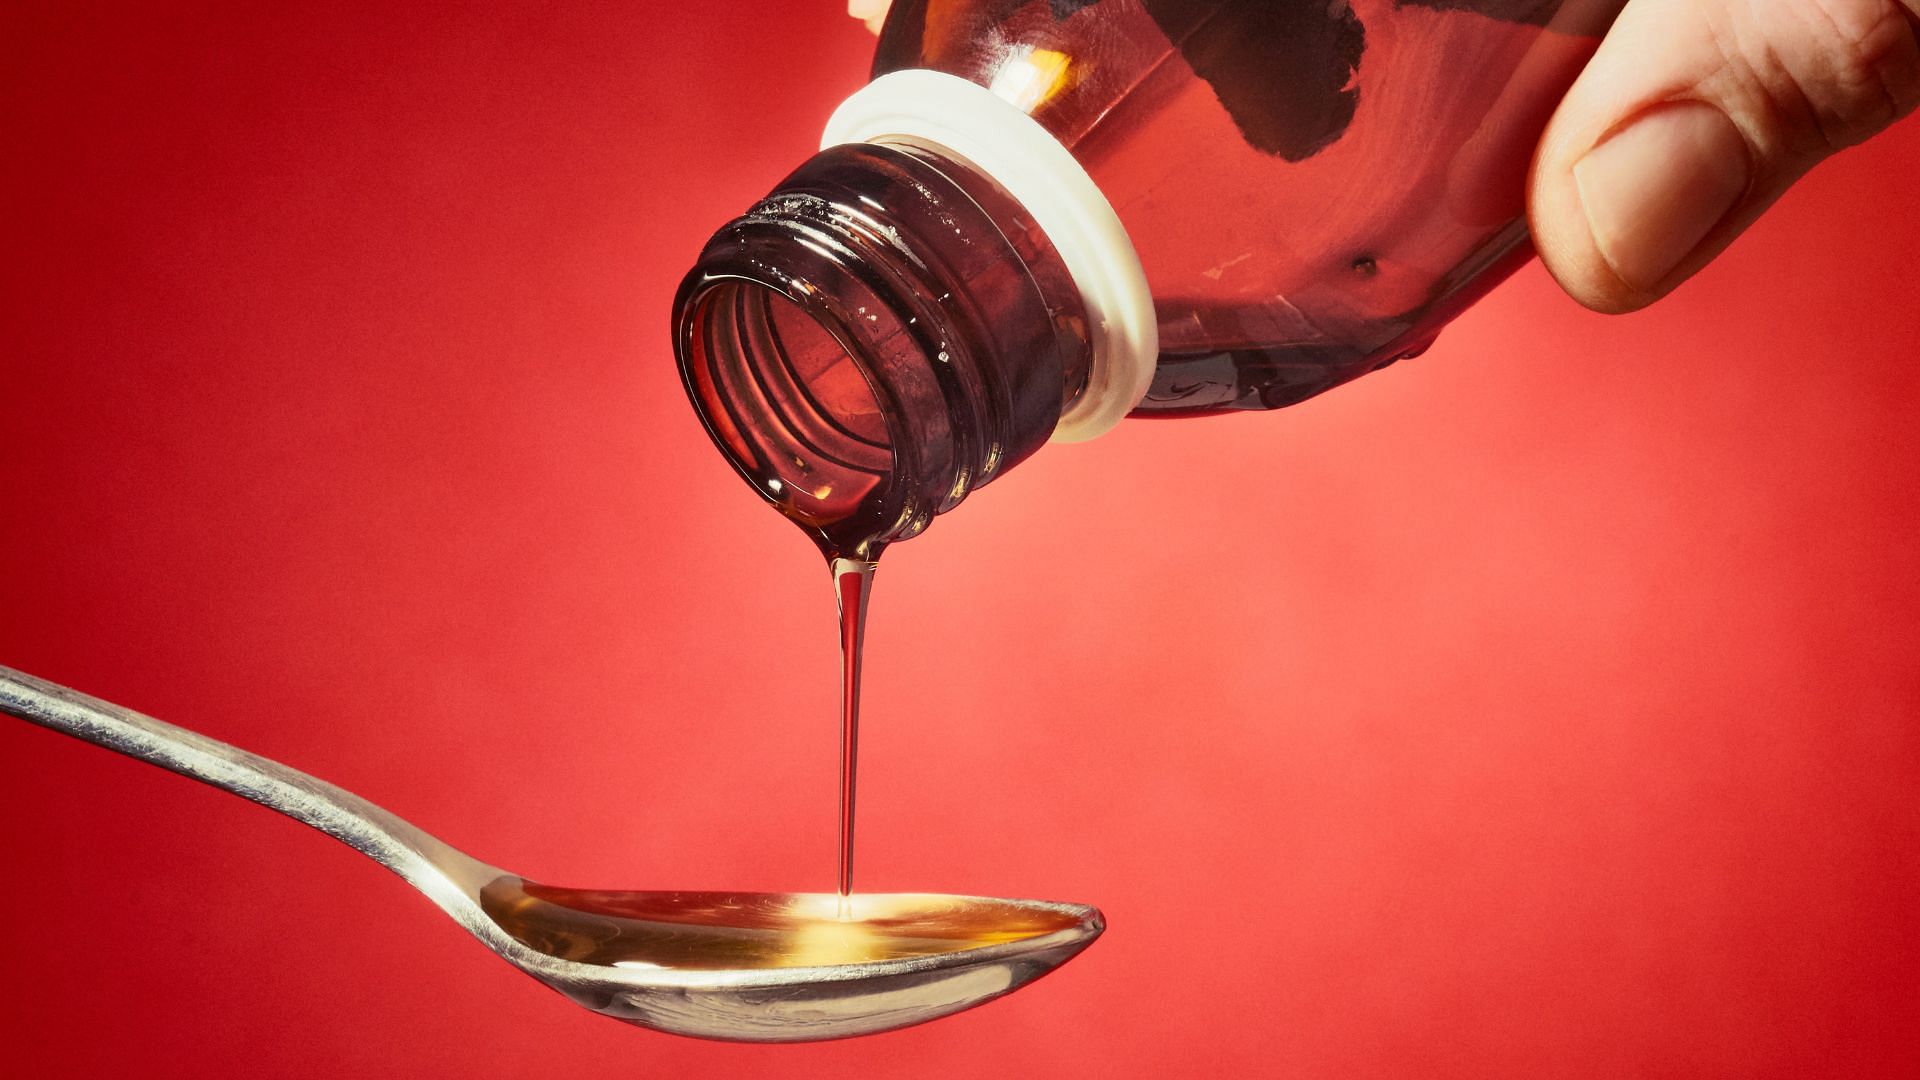 <div class="paragraphs"><p>Uzbekistan Cough Syrup Deaths: WHO recommends against using 2 India-made cough syrups in Uzbekistan.</p></div>